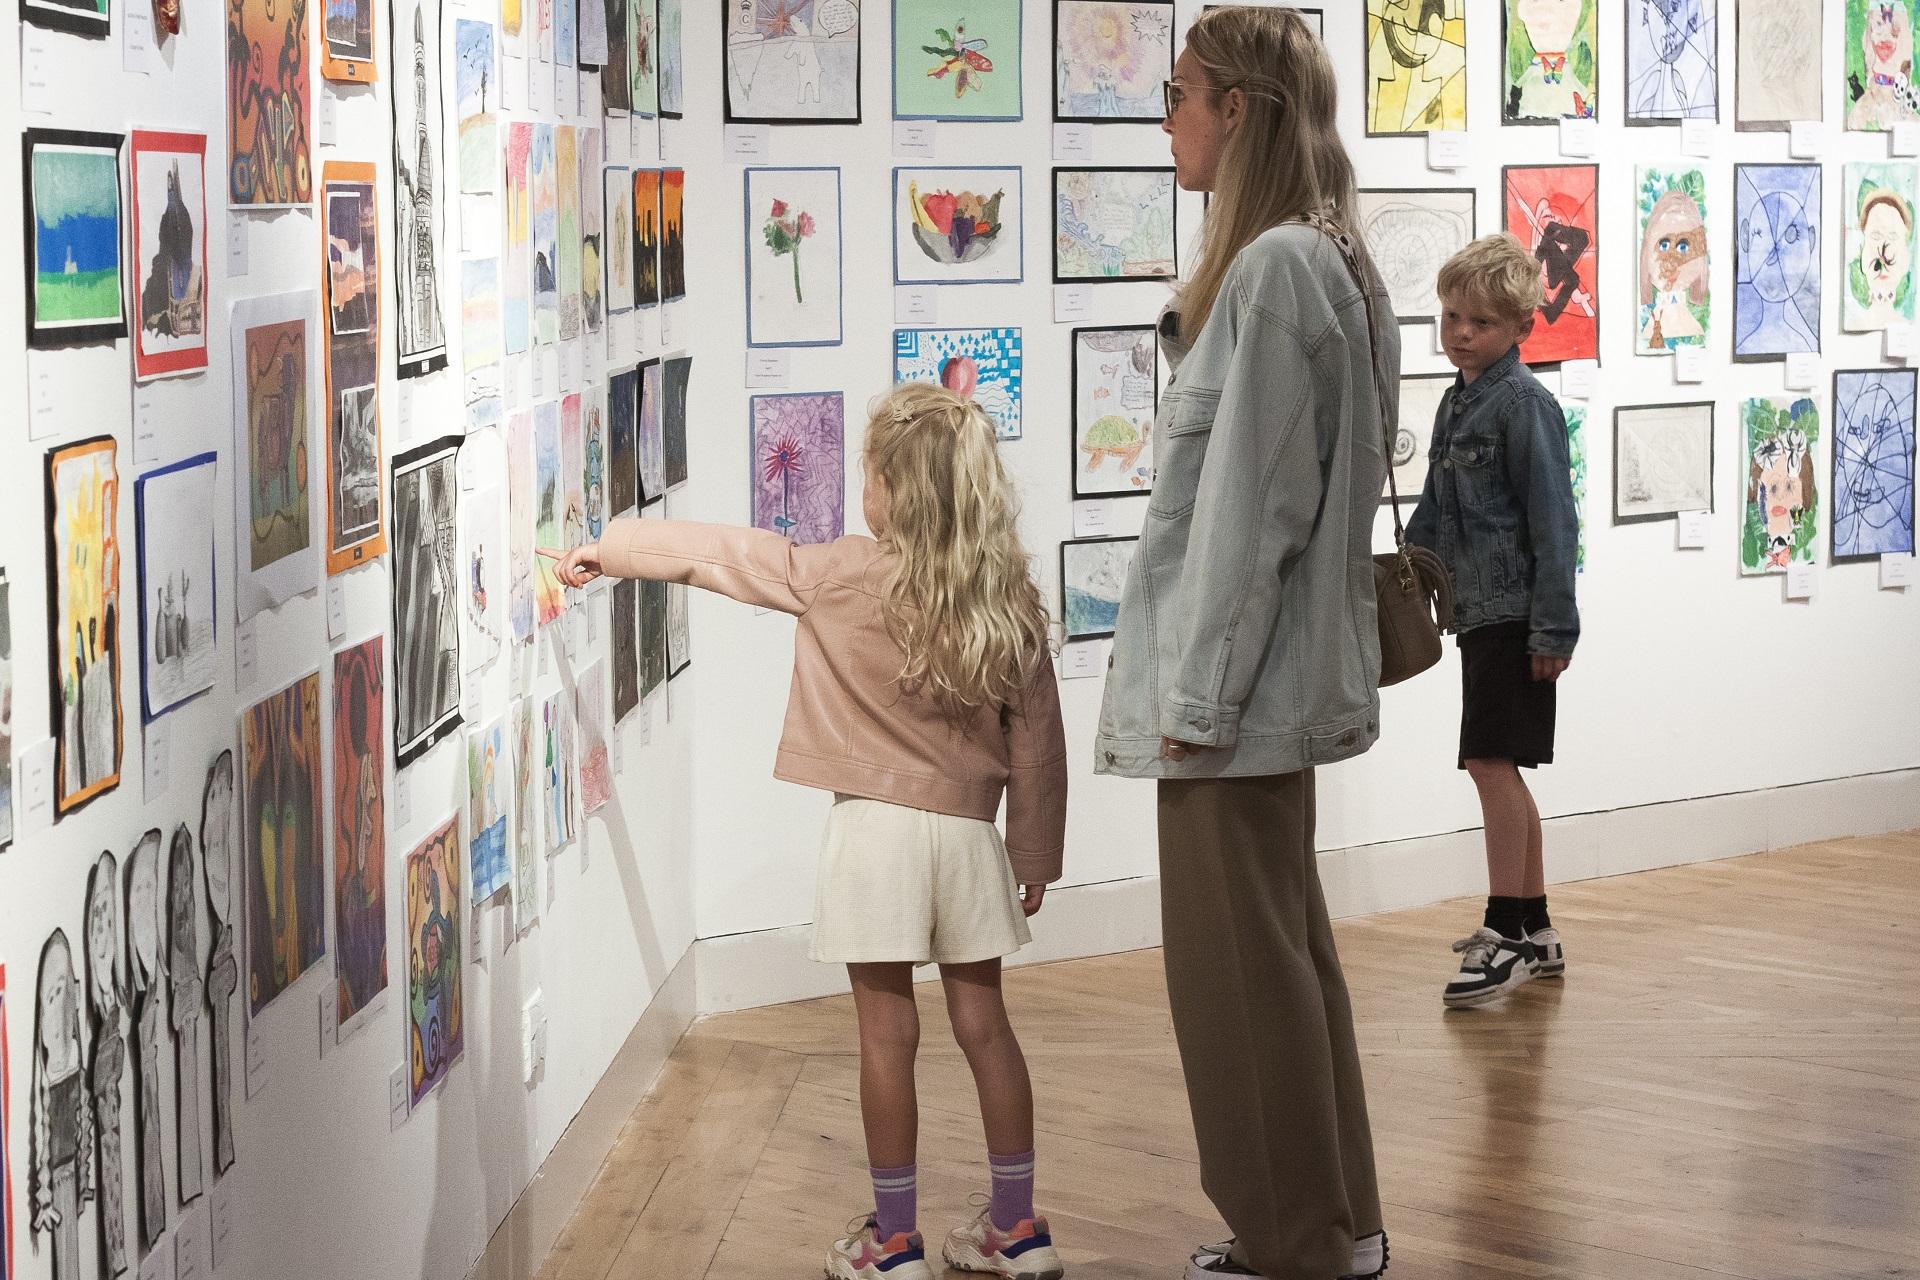 A woman and children looking at art